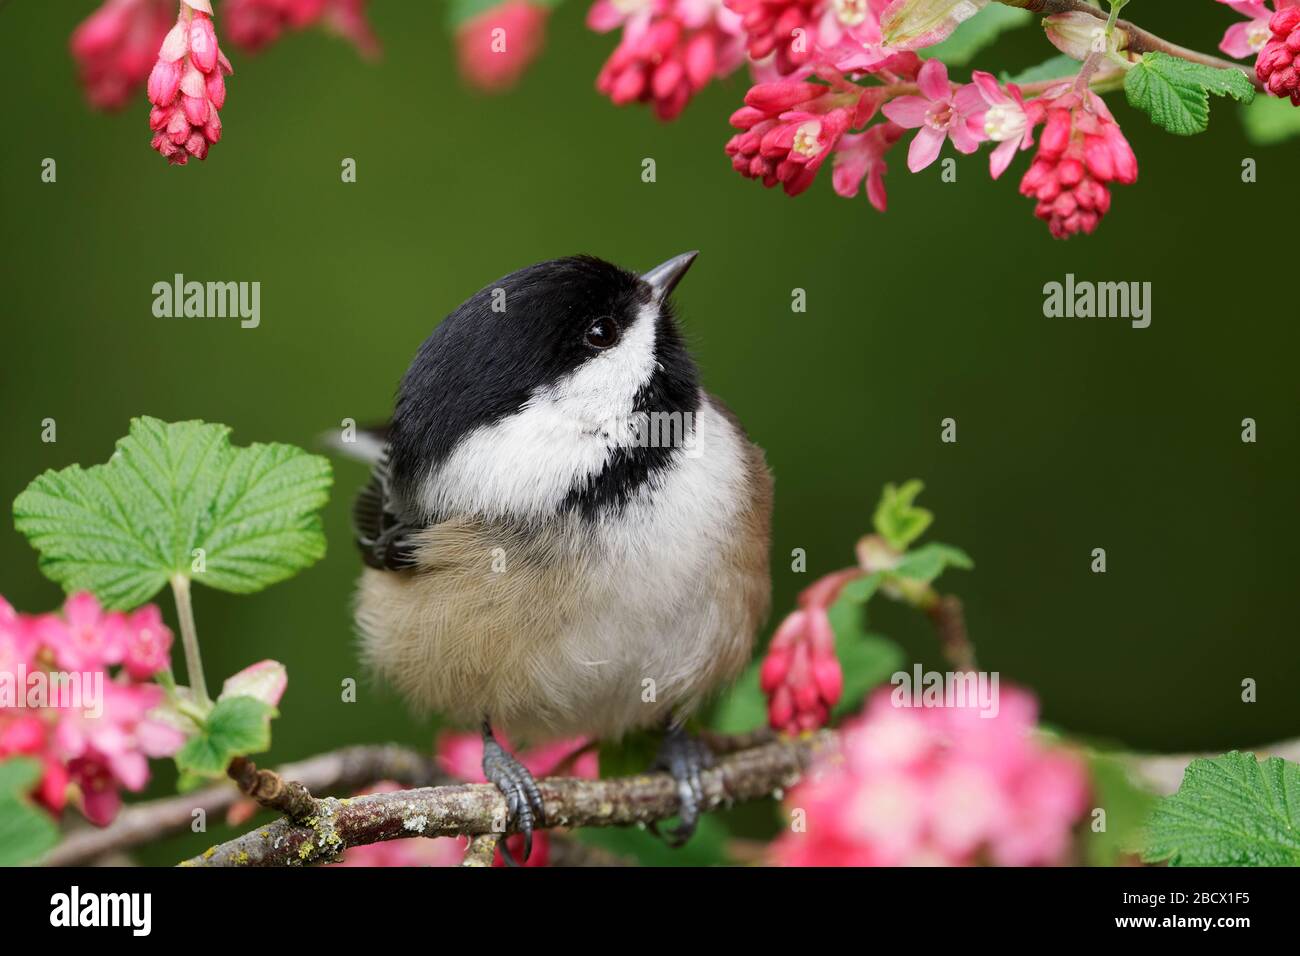 Black-capped chickadee perched on red flowering currant branch, Snohomish, Washington, USA Stock Photo